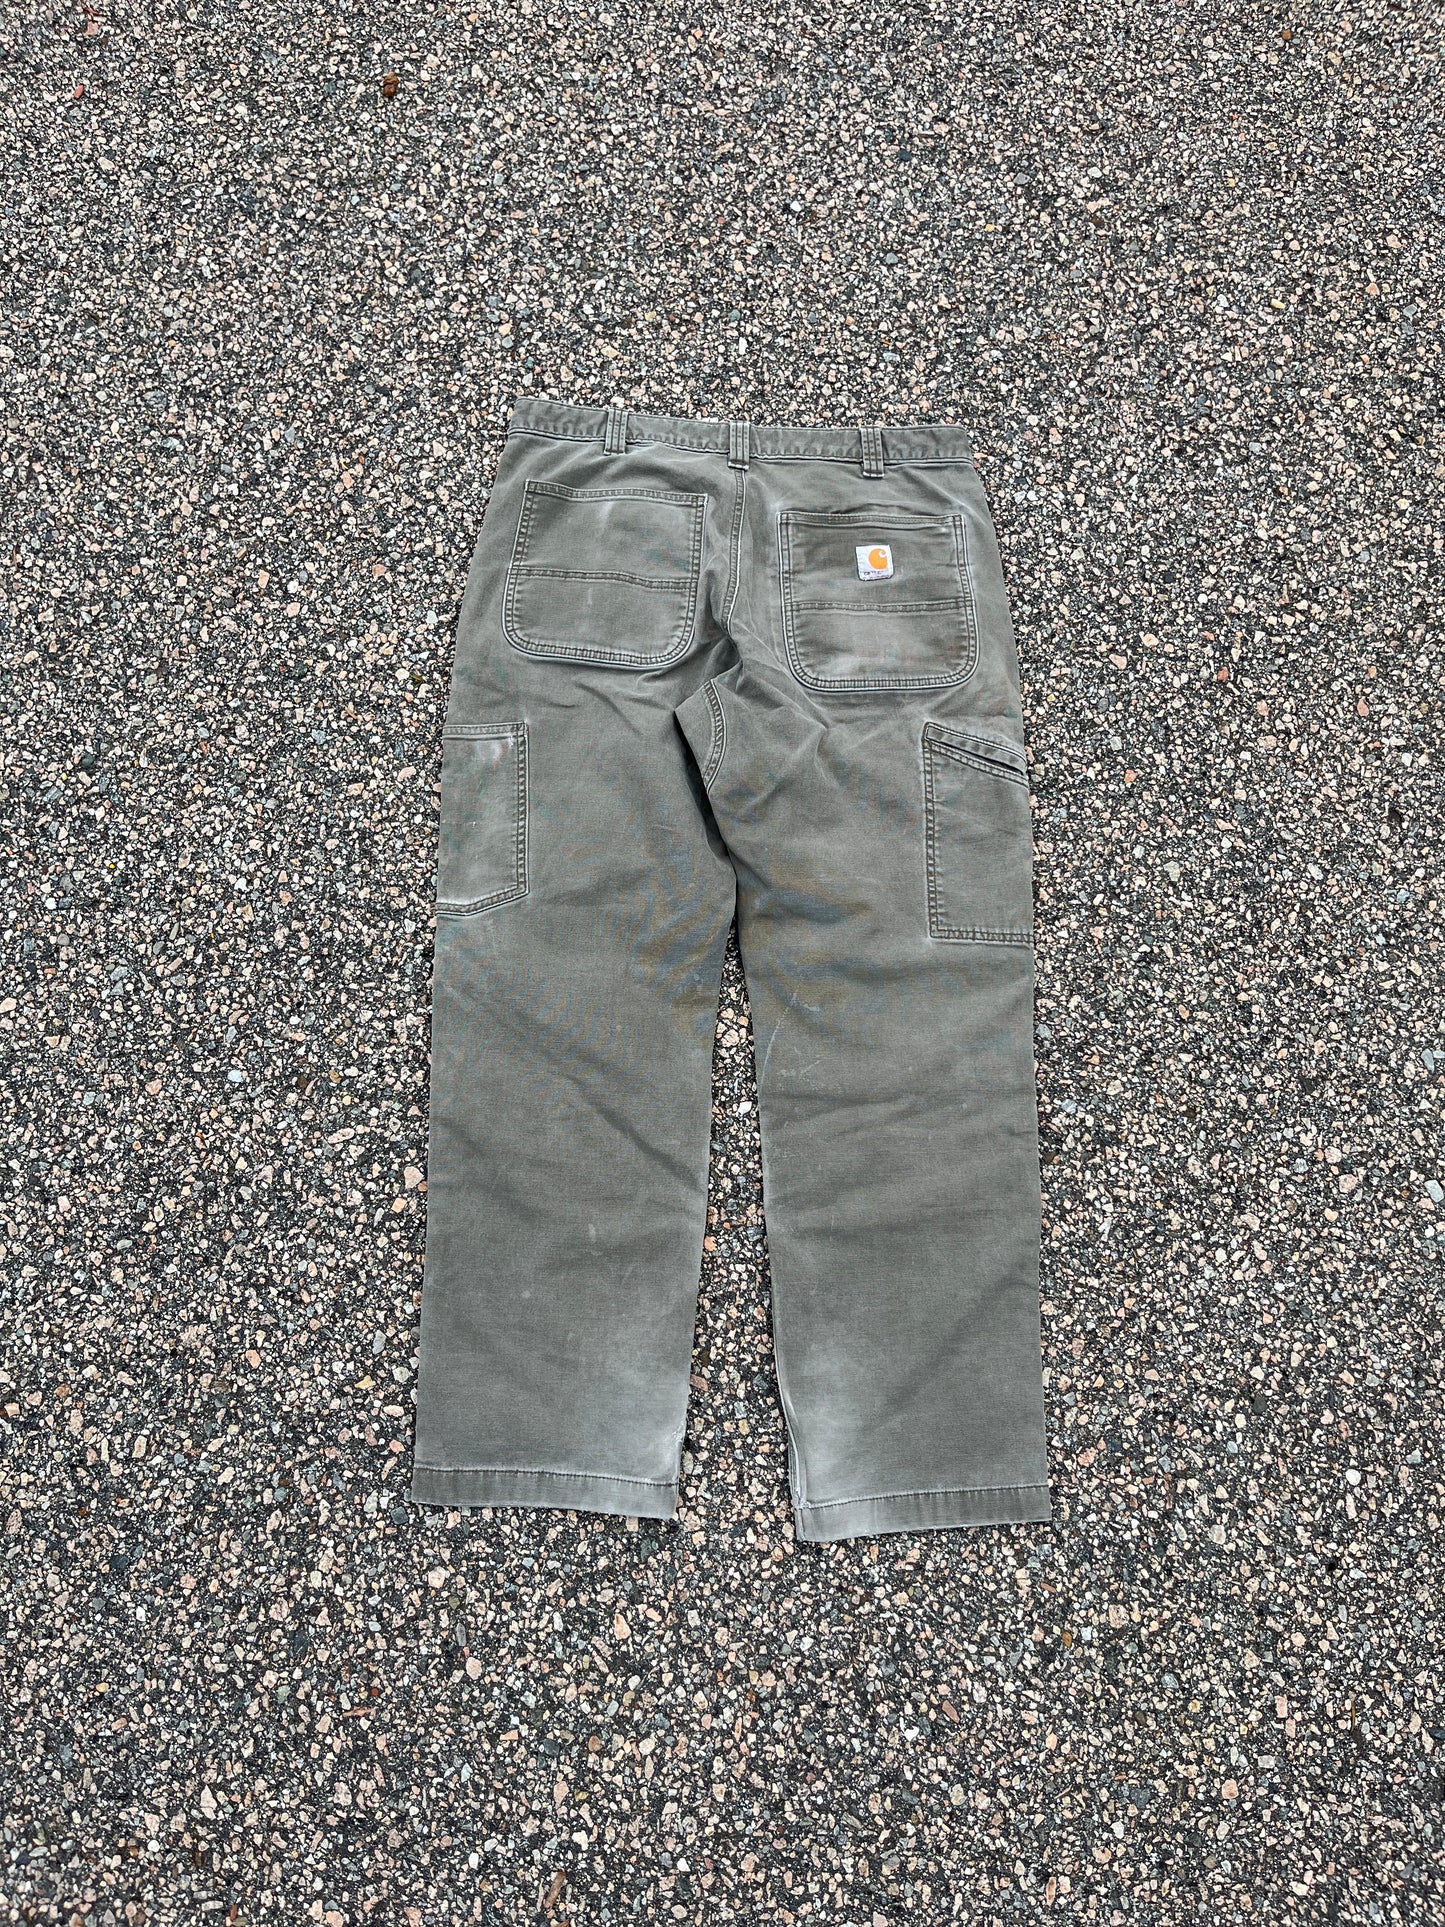 Faded Olive Green Carhartt Double Knee Pants - 33 x 28